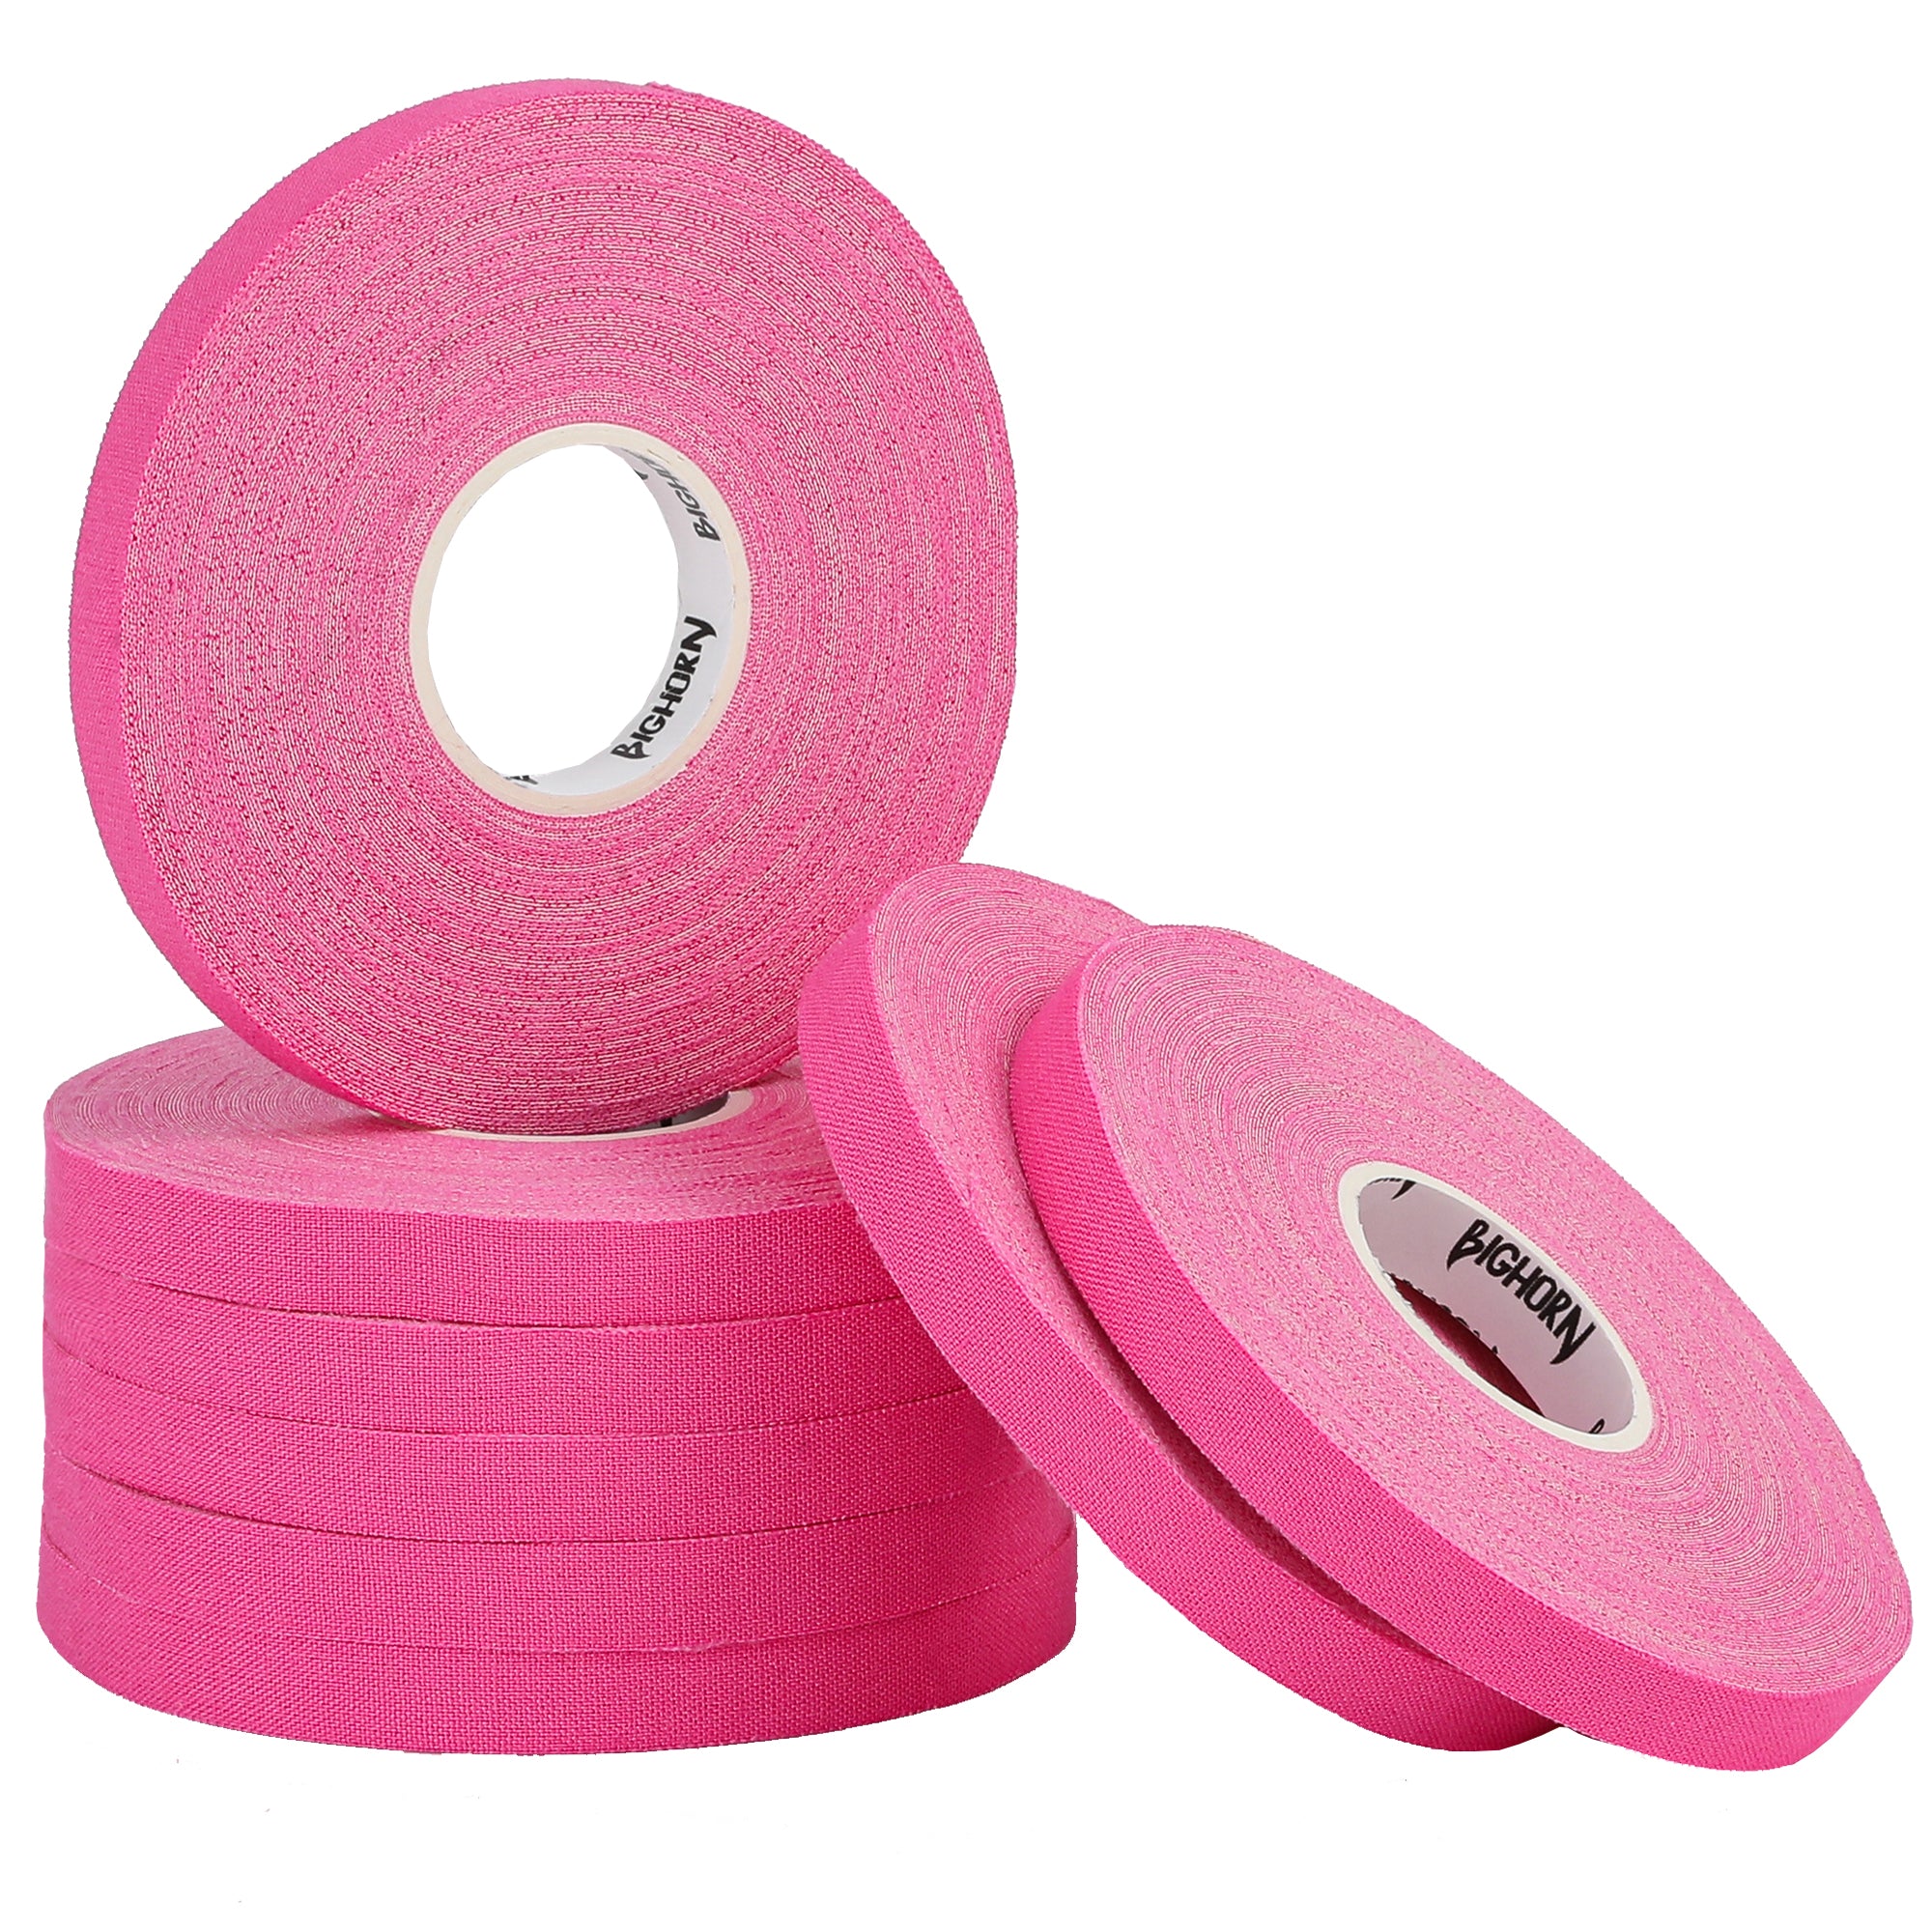 Pro Series Tape, 8-Rolls with Tin Holder, Pink